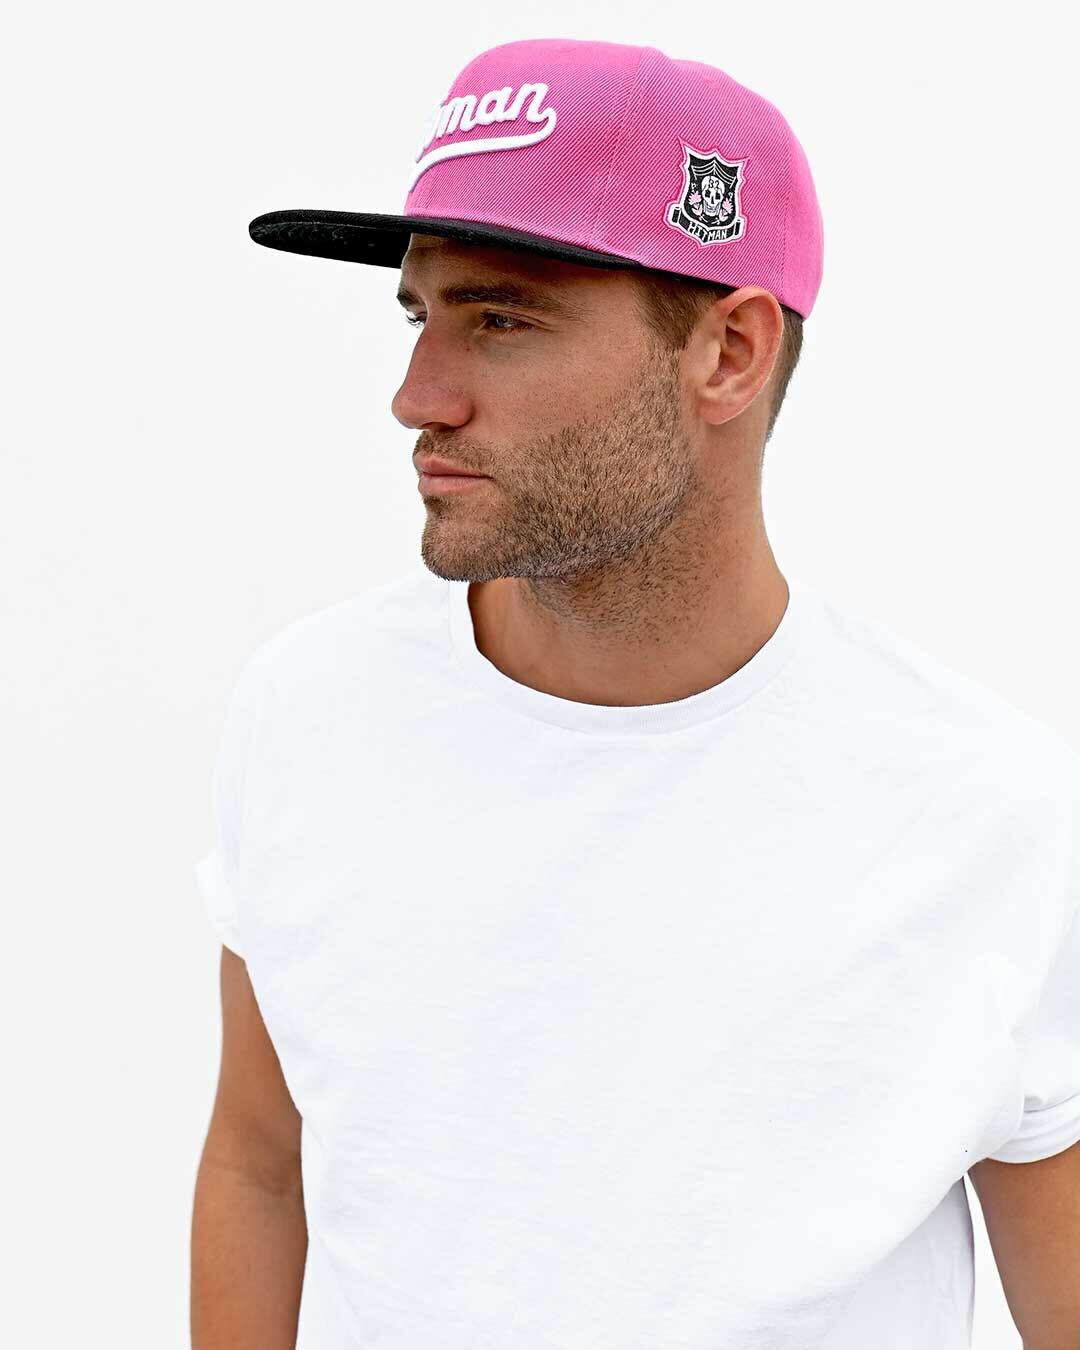 Bret Hart Hitman Pink Snapback Hat - Roots of Fight Canada